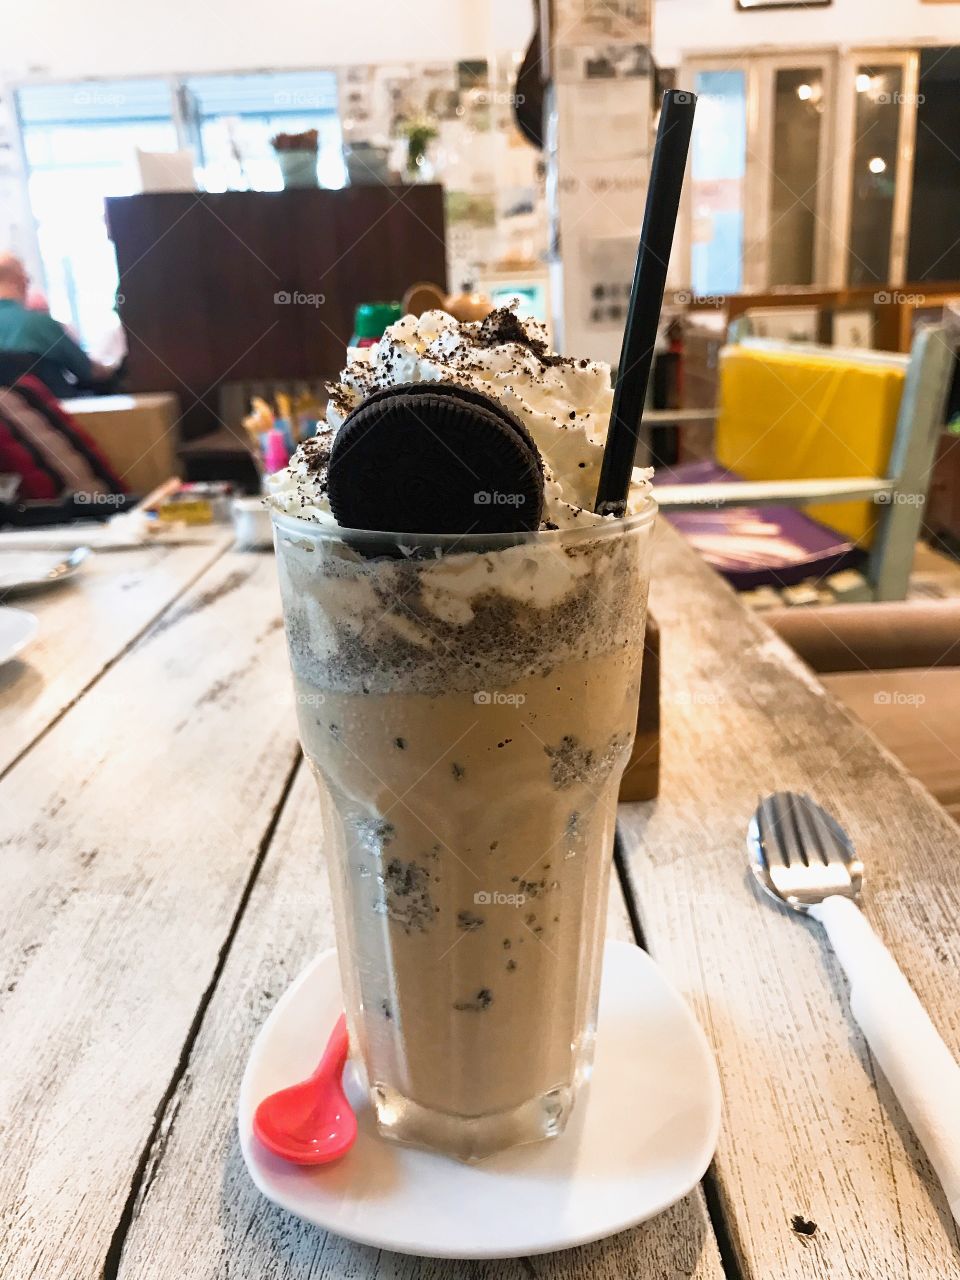 Oreo and cream blended 🥛